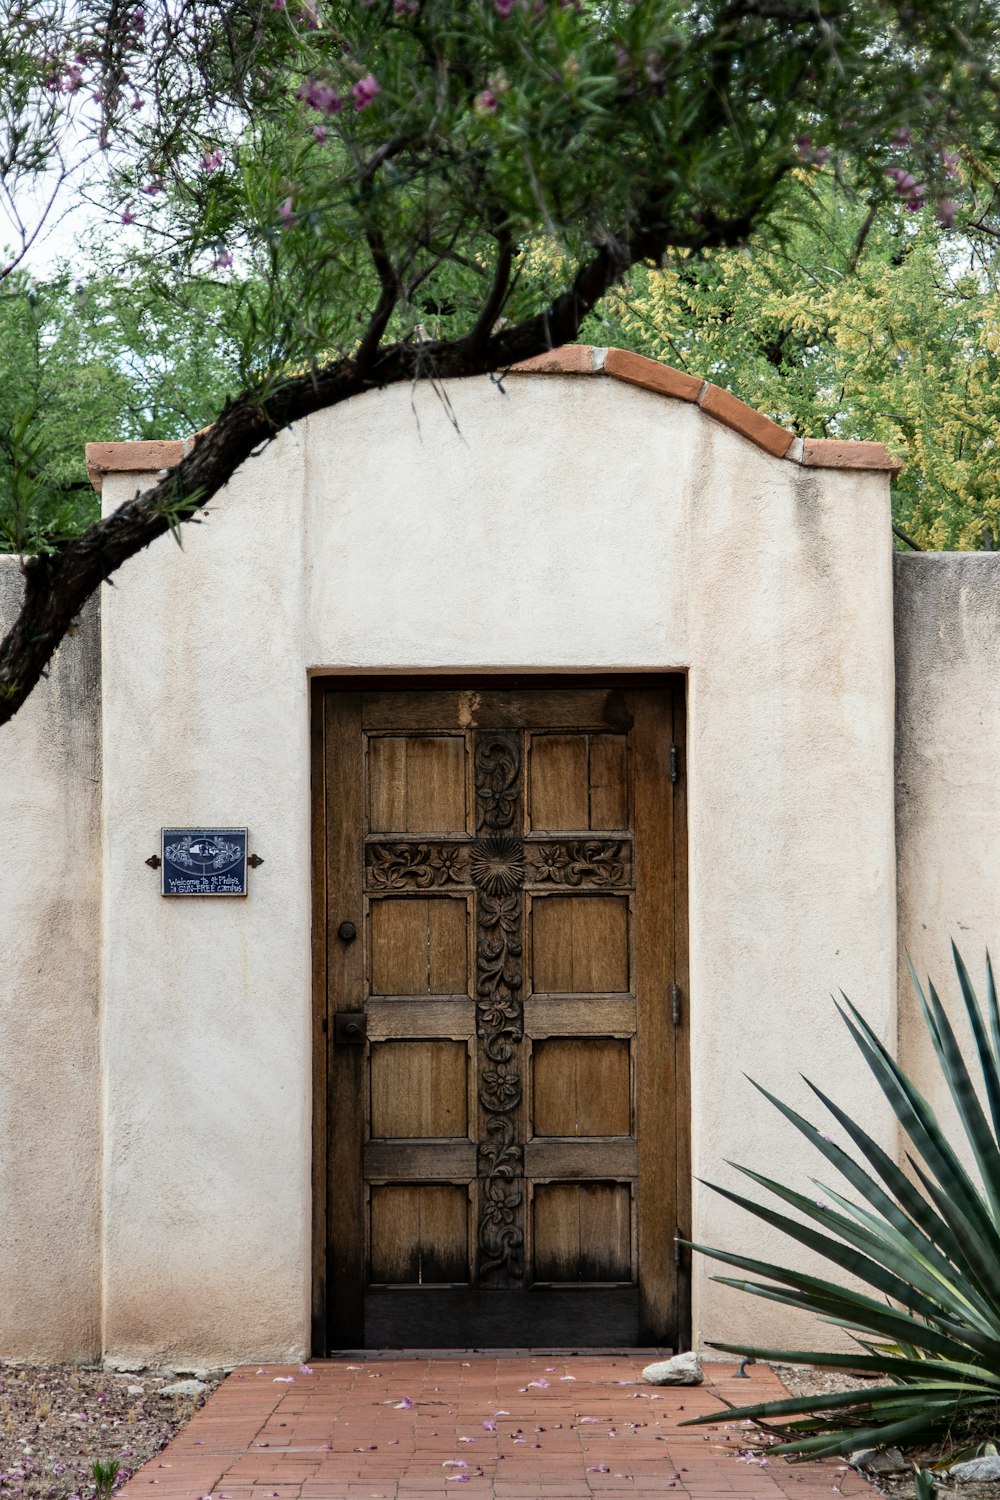 a wooden door in a white stucco building